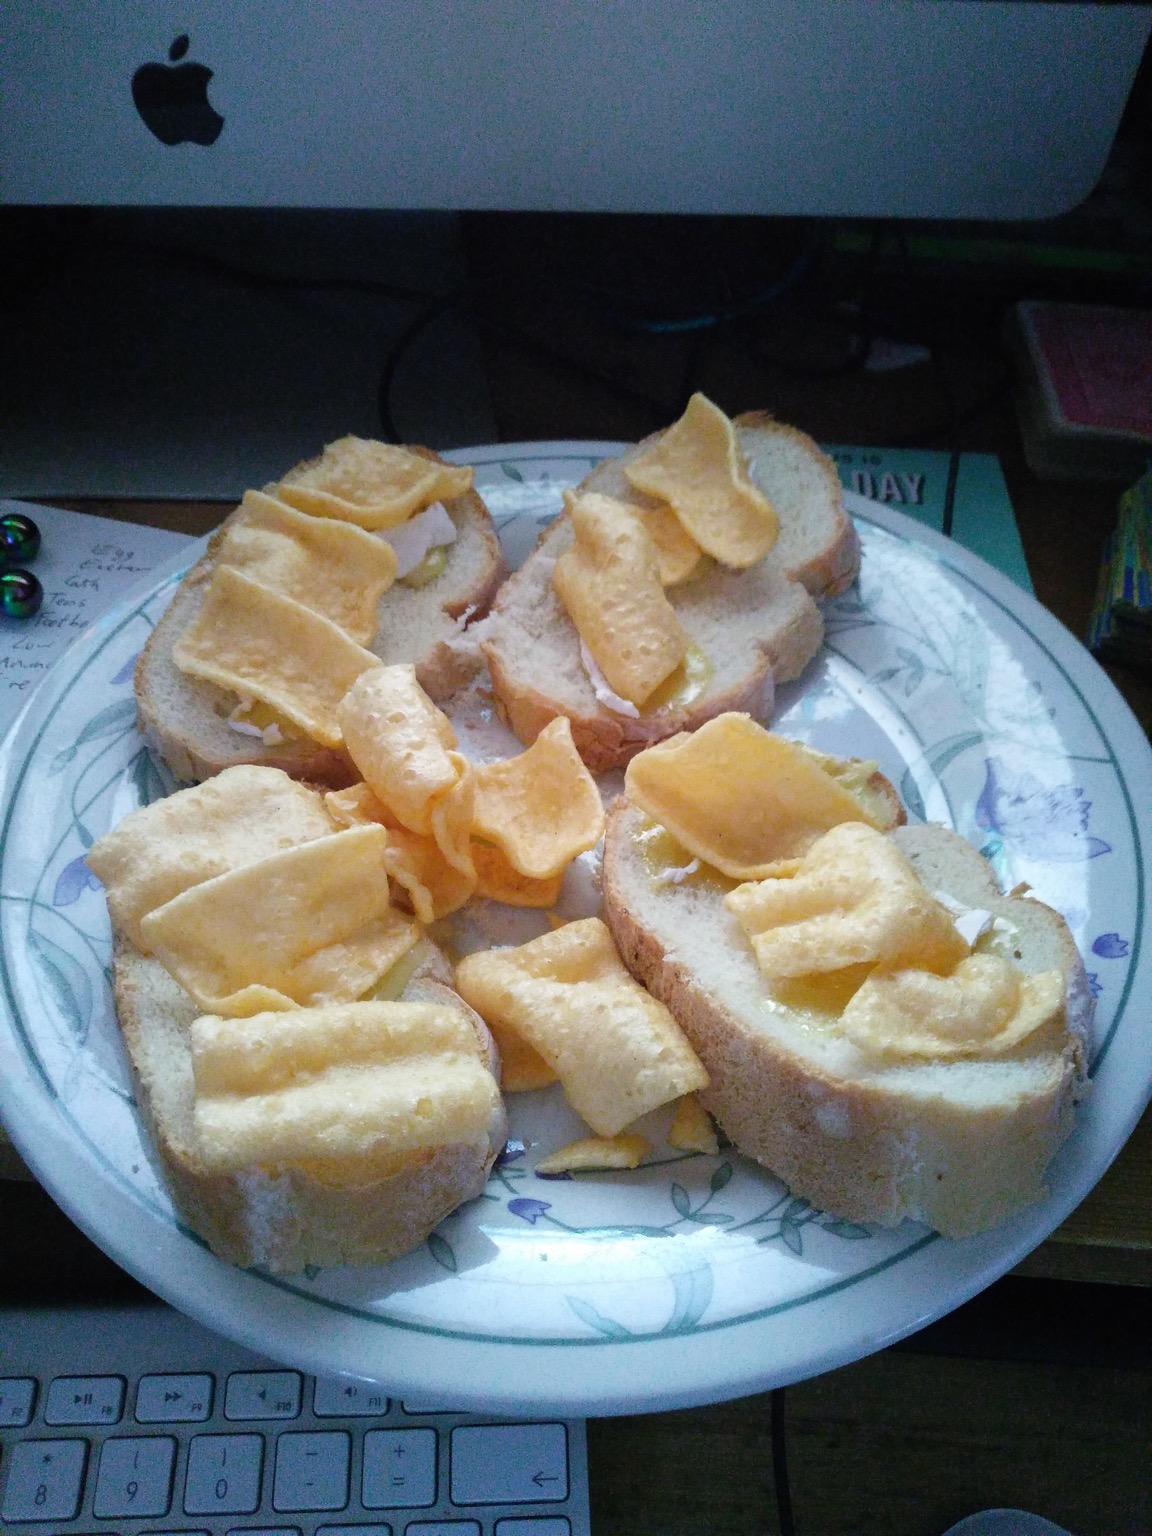 Corn snacks and brie on sliced white bread